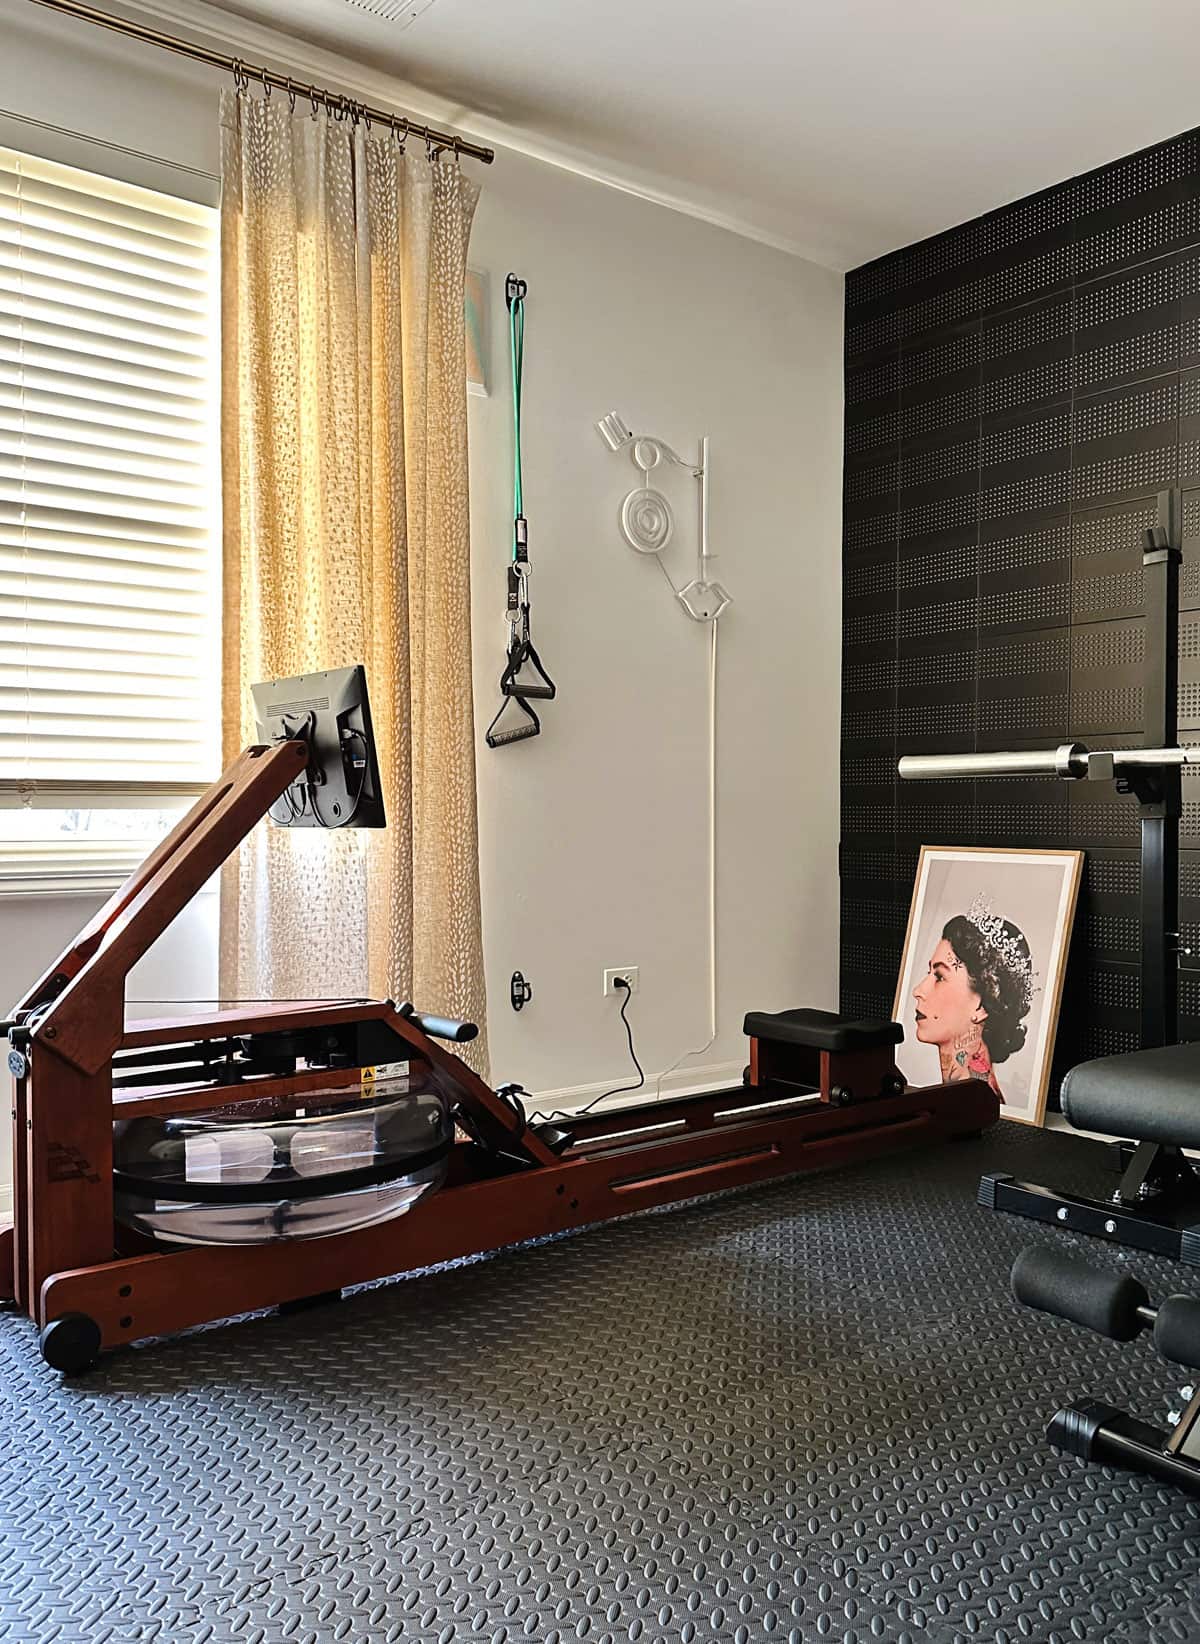 Best Small Home Gym Ideas & Exercise Equipment